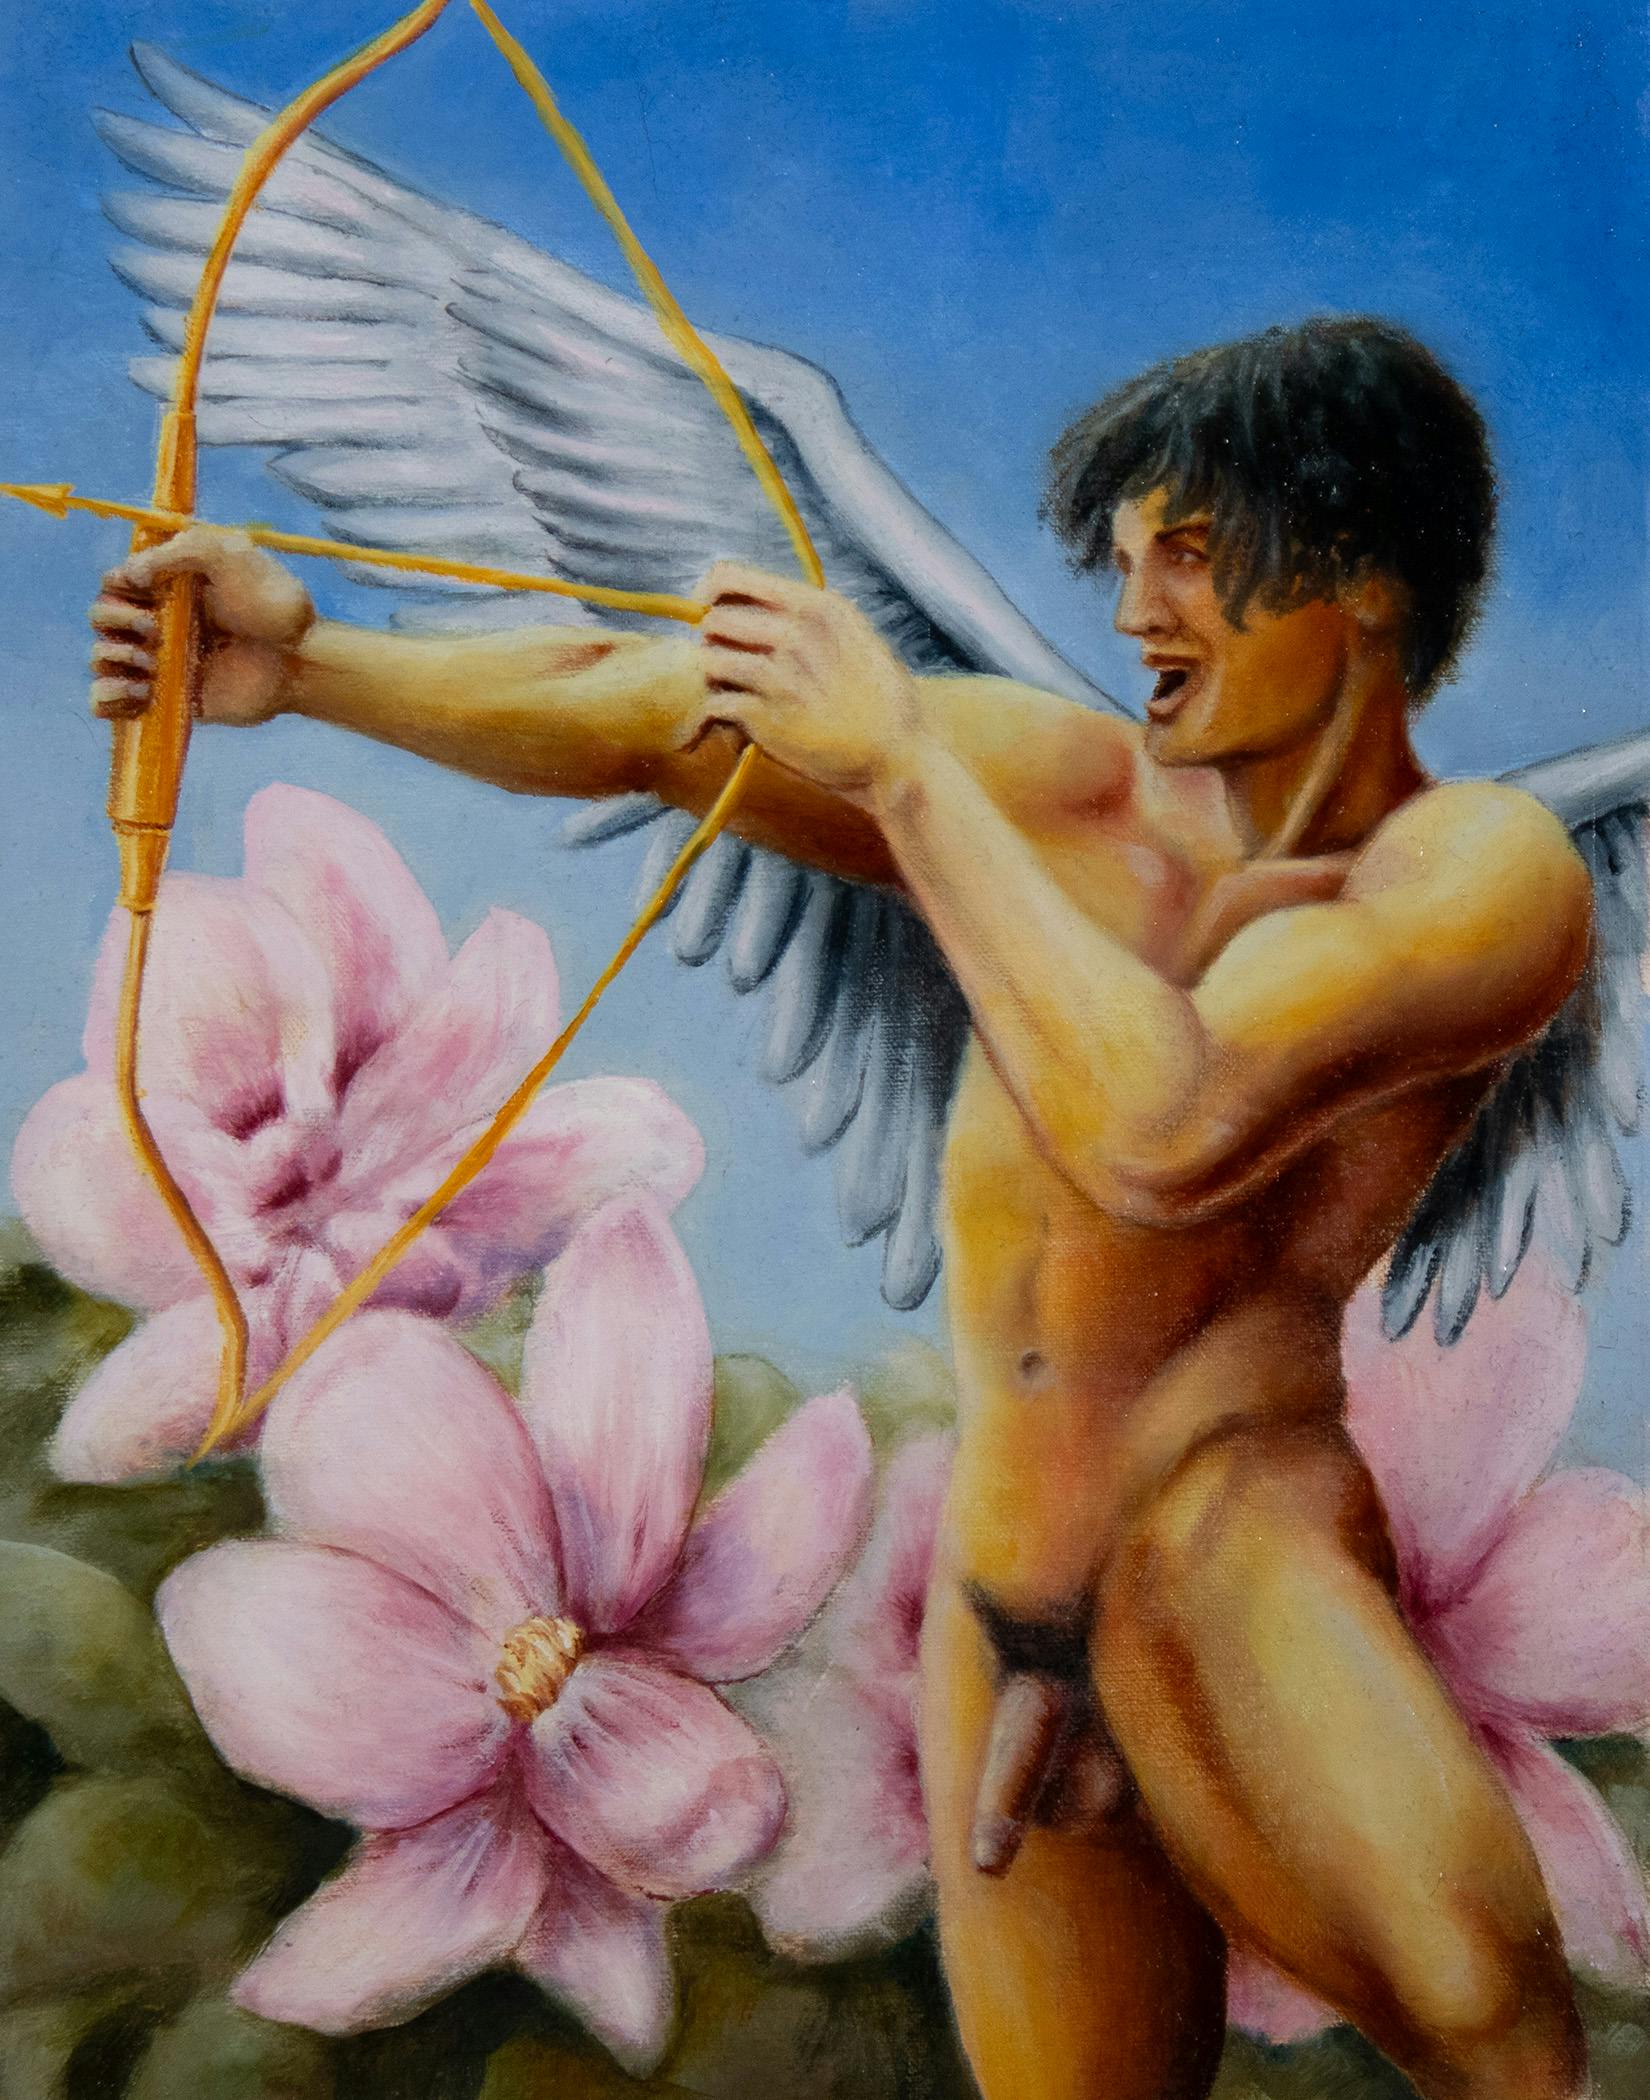 oil painting of muscular, nude, male angel against a pristine blue sky, graced by large magnolia blossoms. he's grinning impishly and aiming a golden bow and arrow at an unseen target